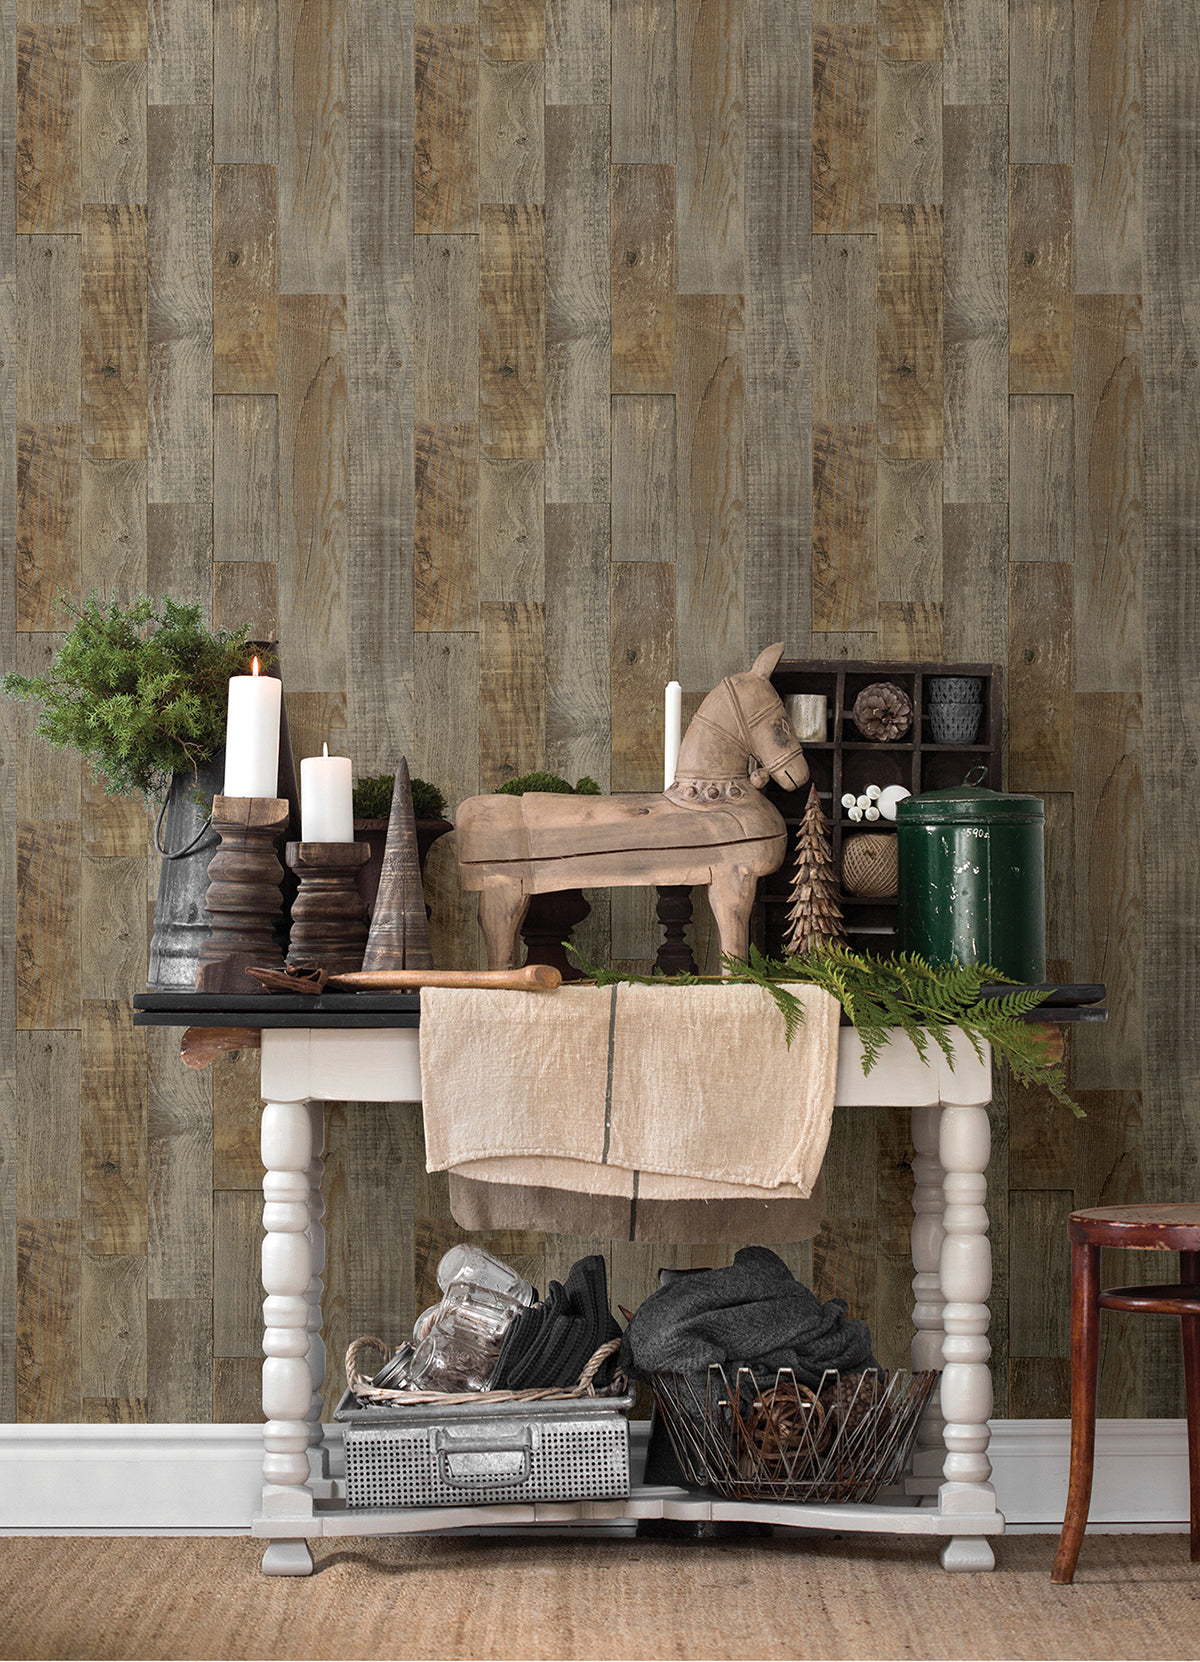 Chebacco Brown Wood Planks Wallpaper  | Brewster Wallcovering